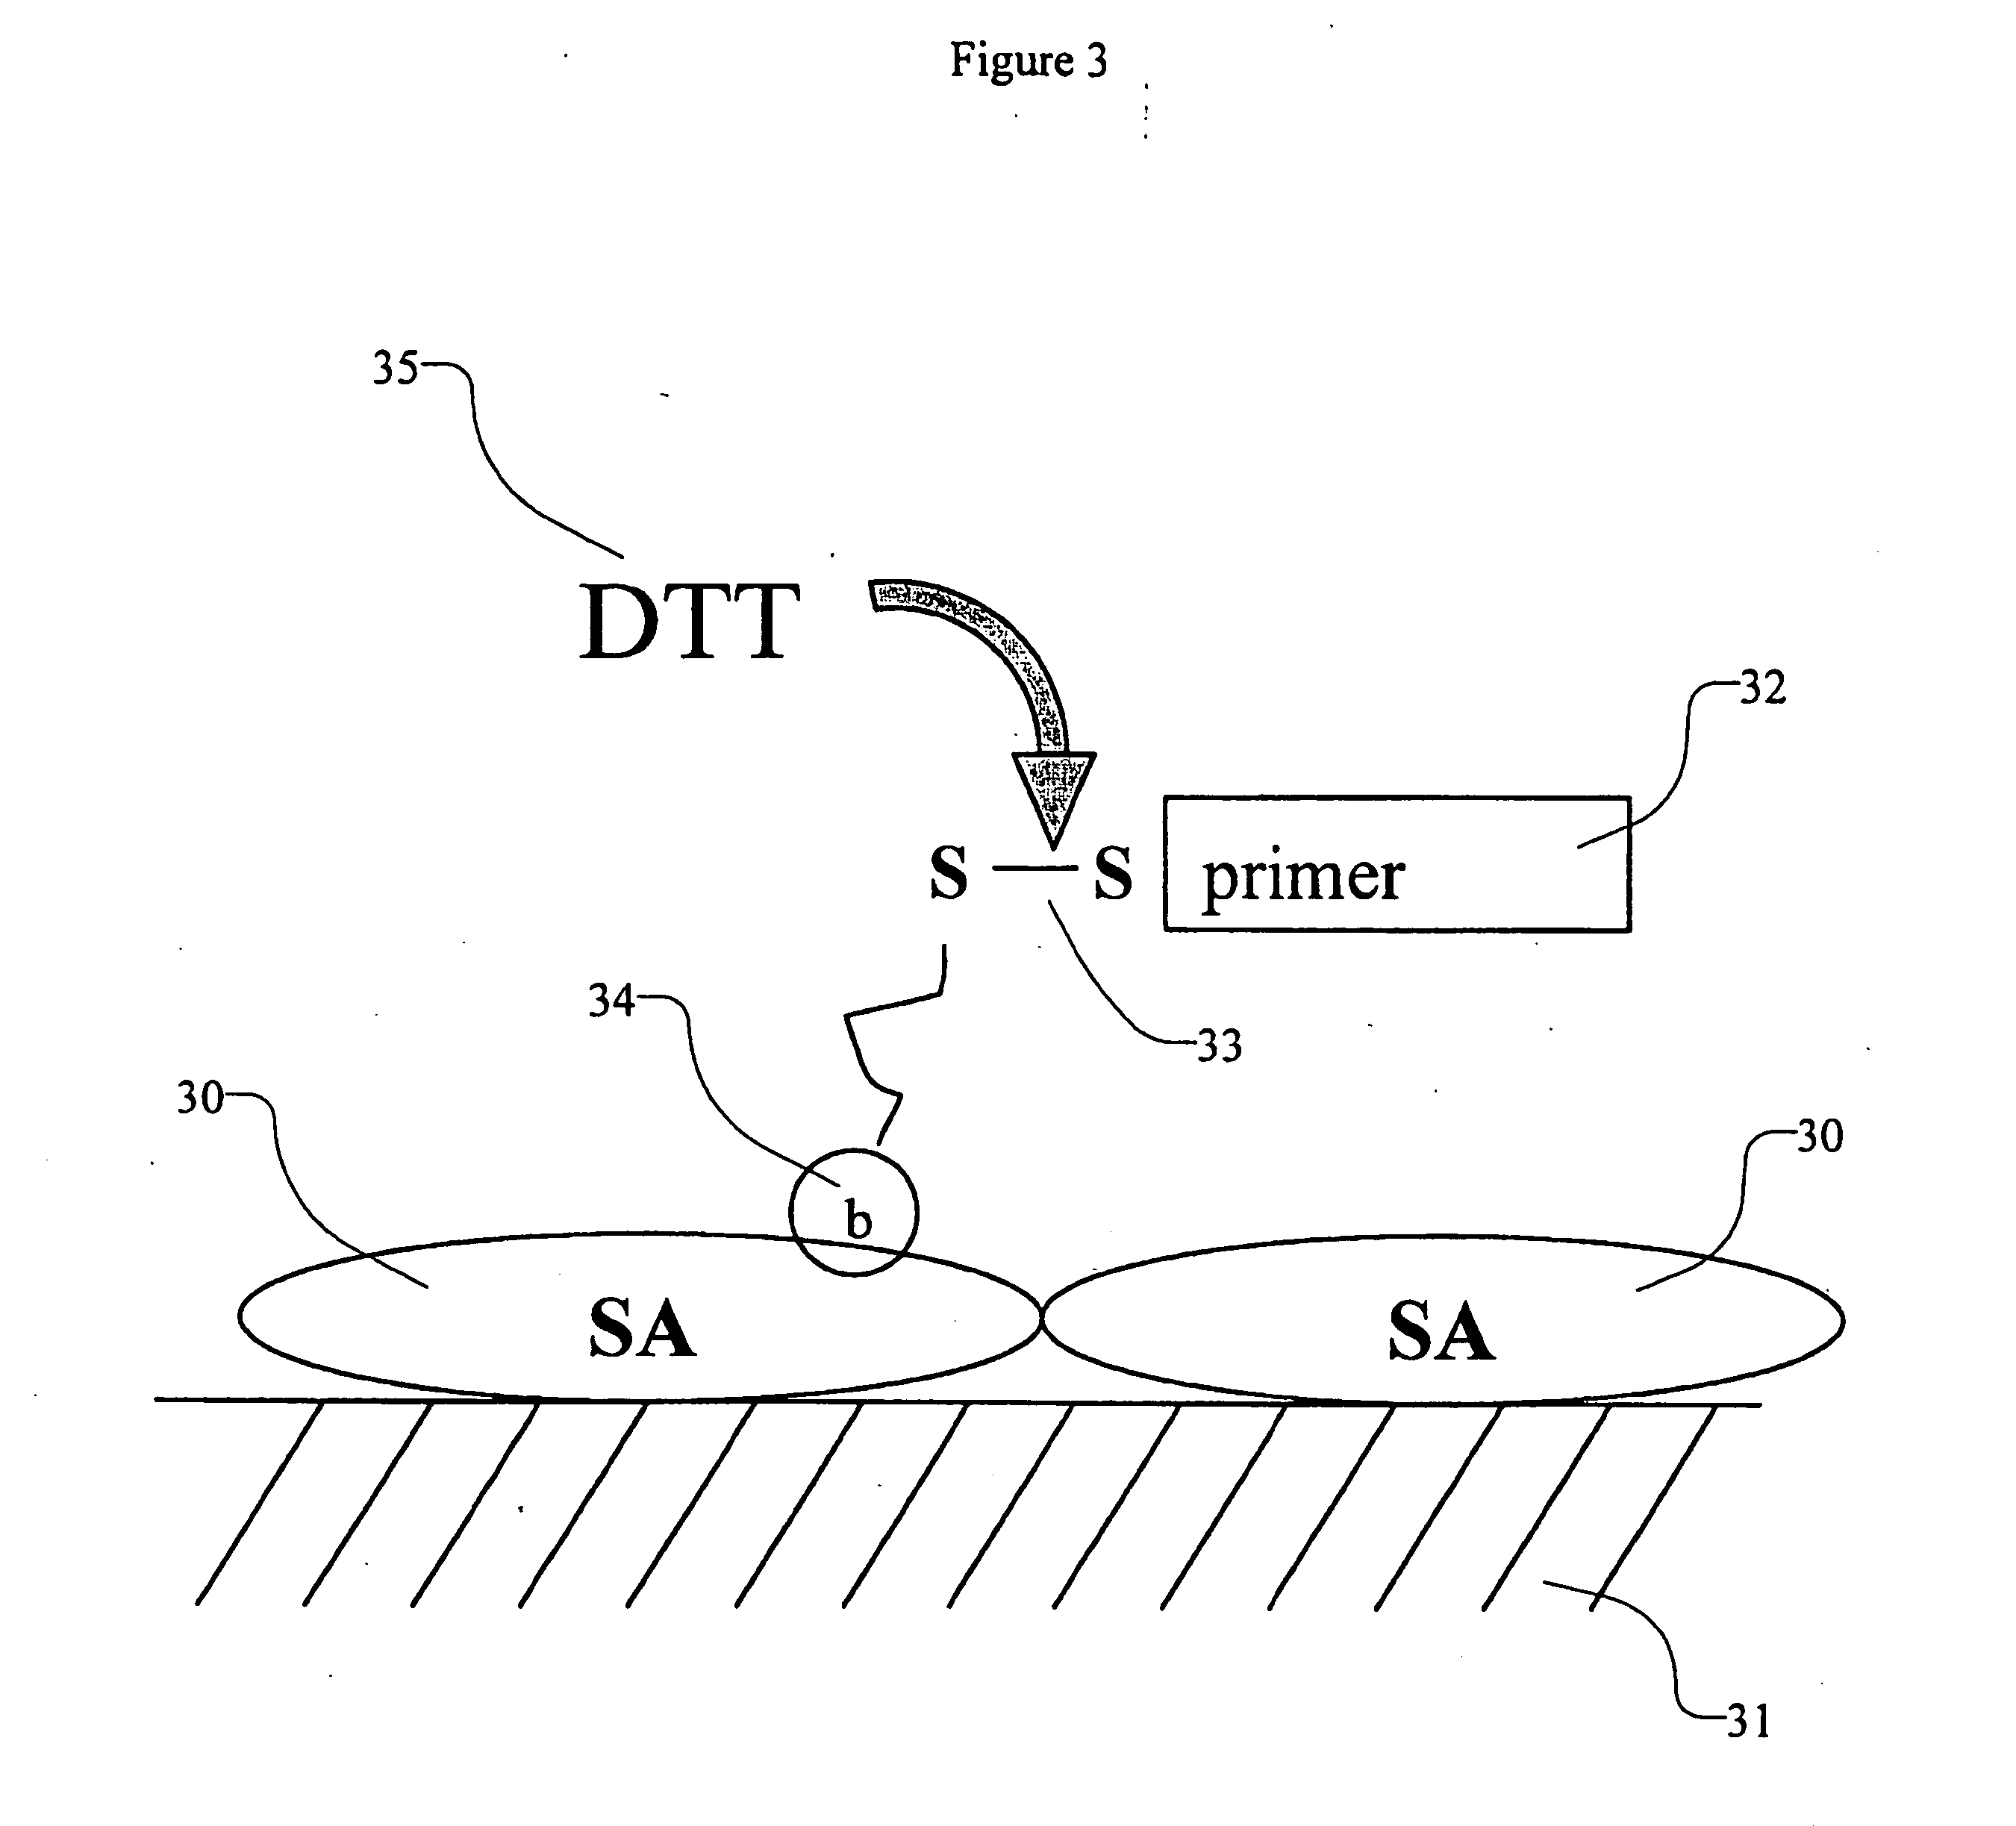 High density sequence detection methods and apparatus